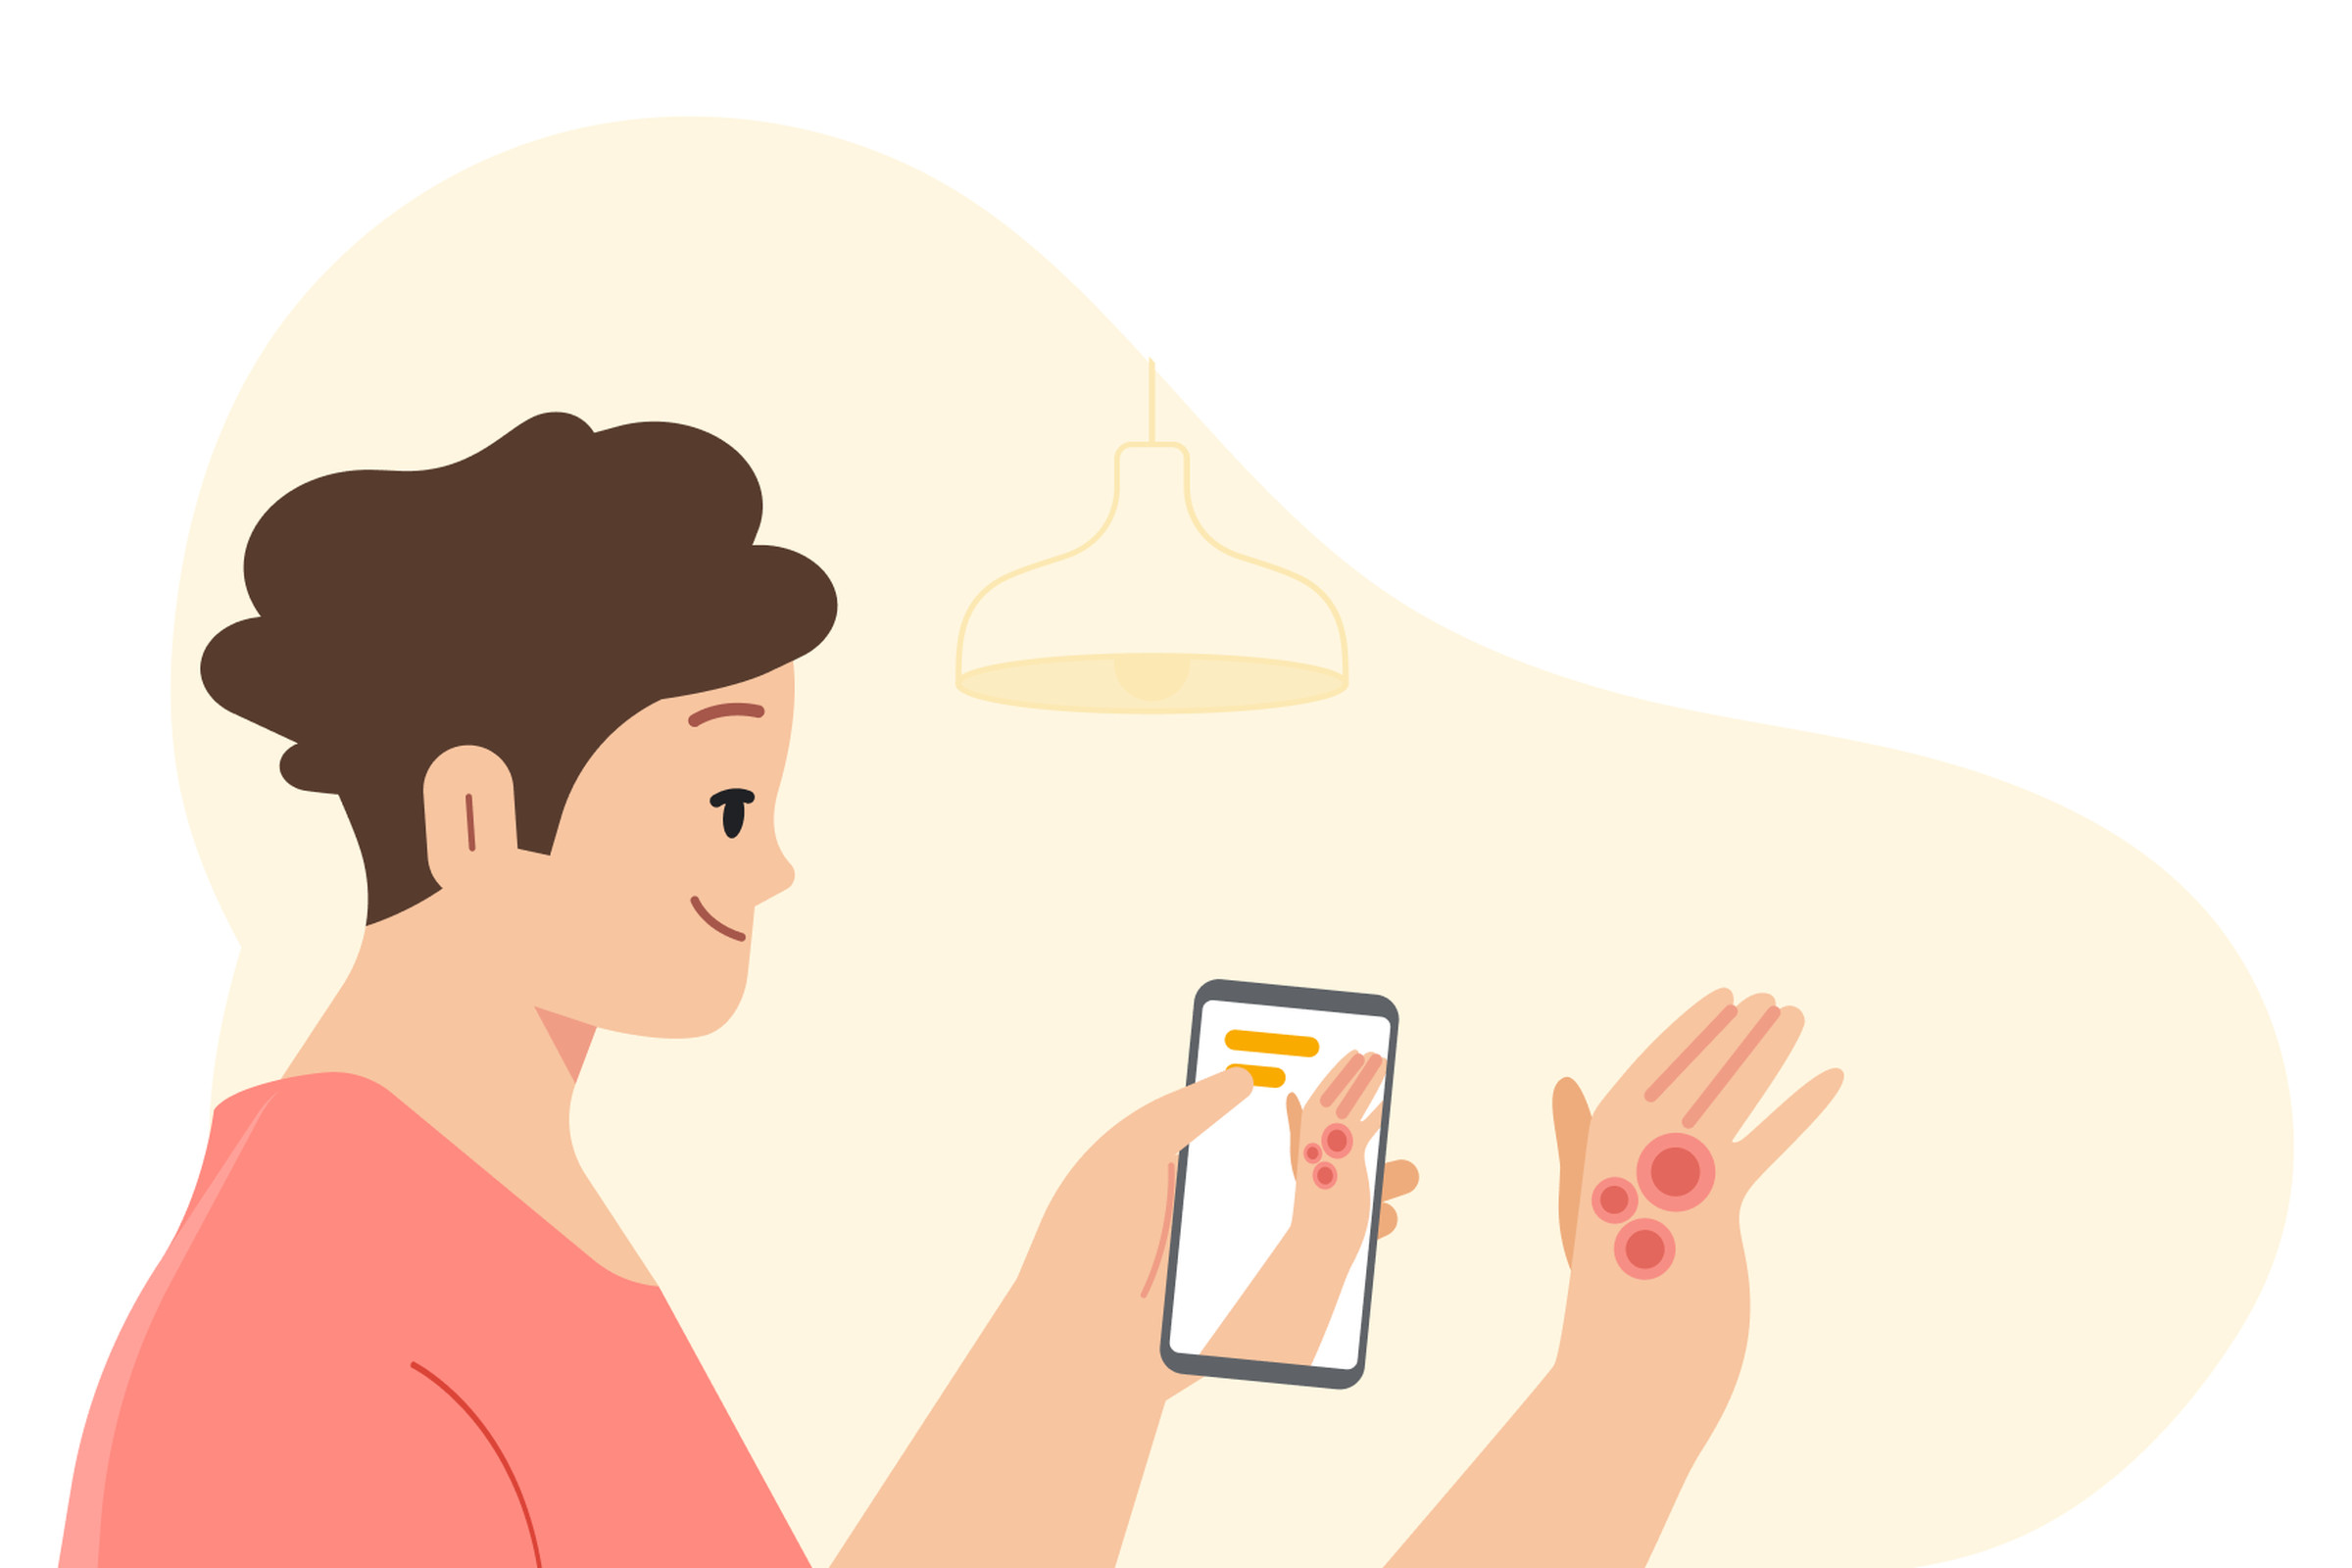 Cartoon image of a person using a smartphone to photograph a rash on their hand.